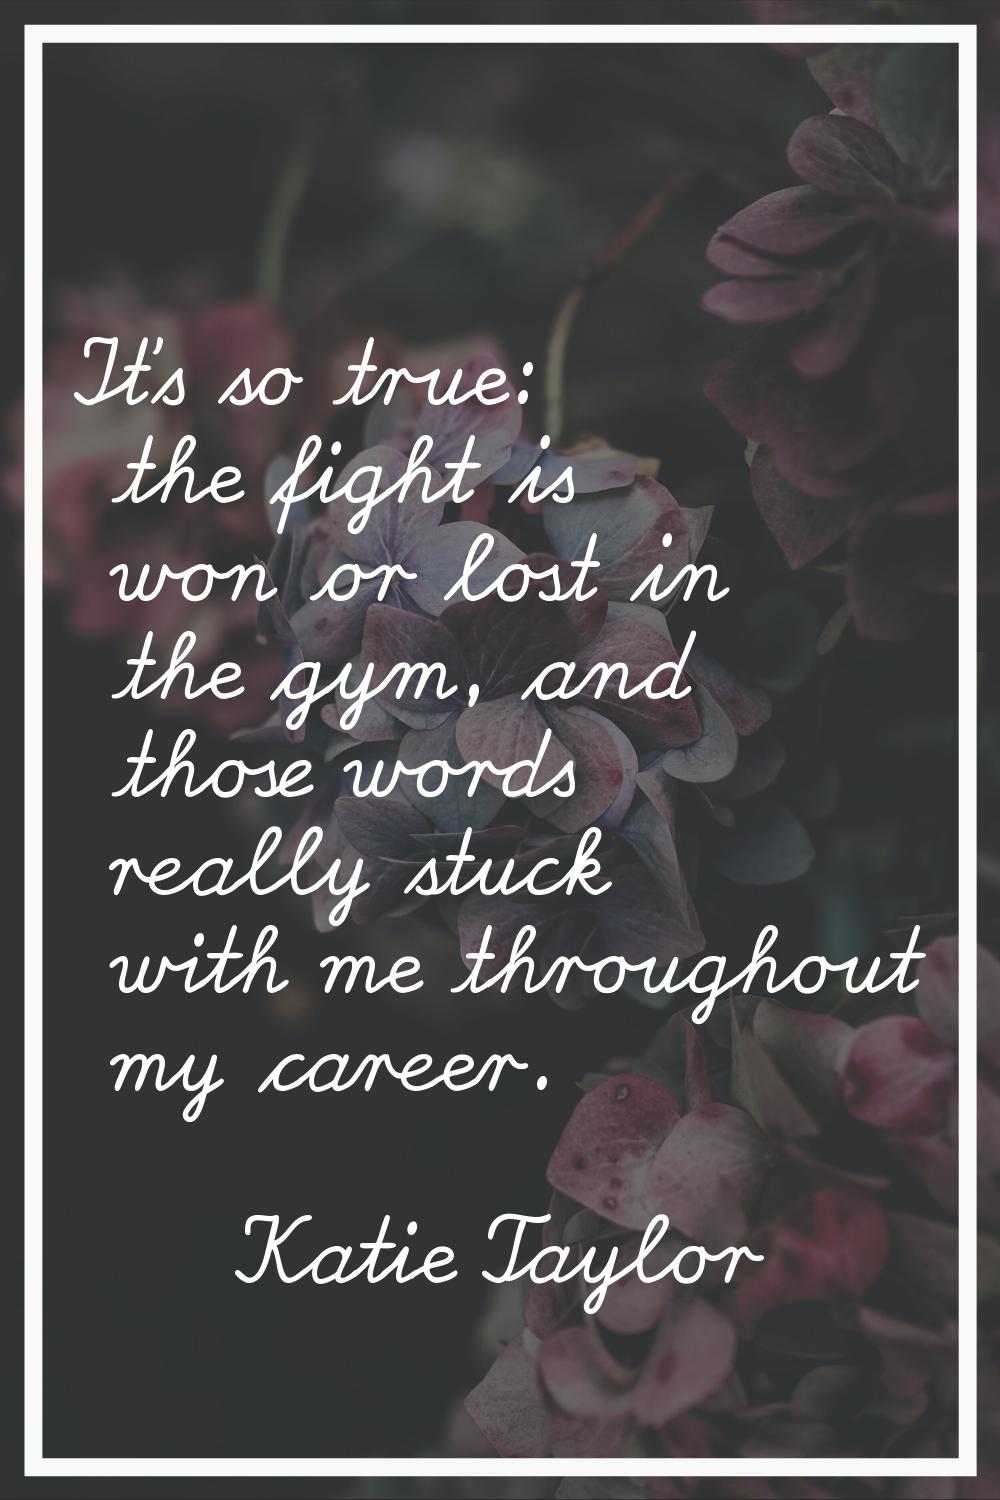 It's so true: the fight is won or lost in the gym, and those words really stuck with me throughout 